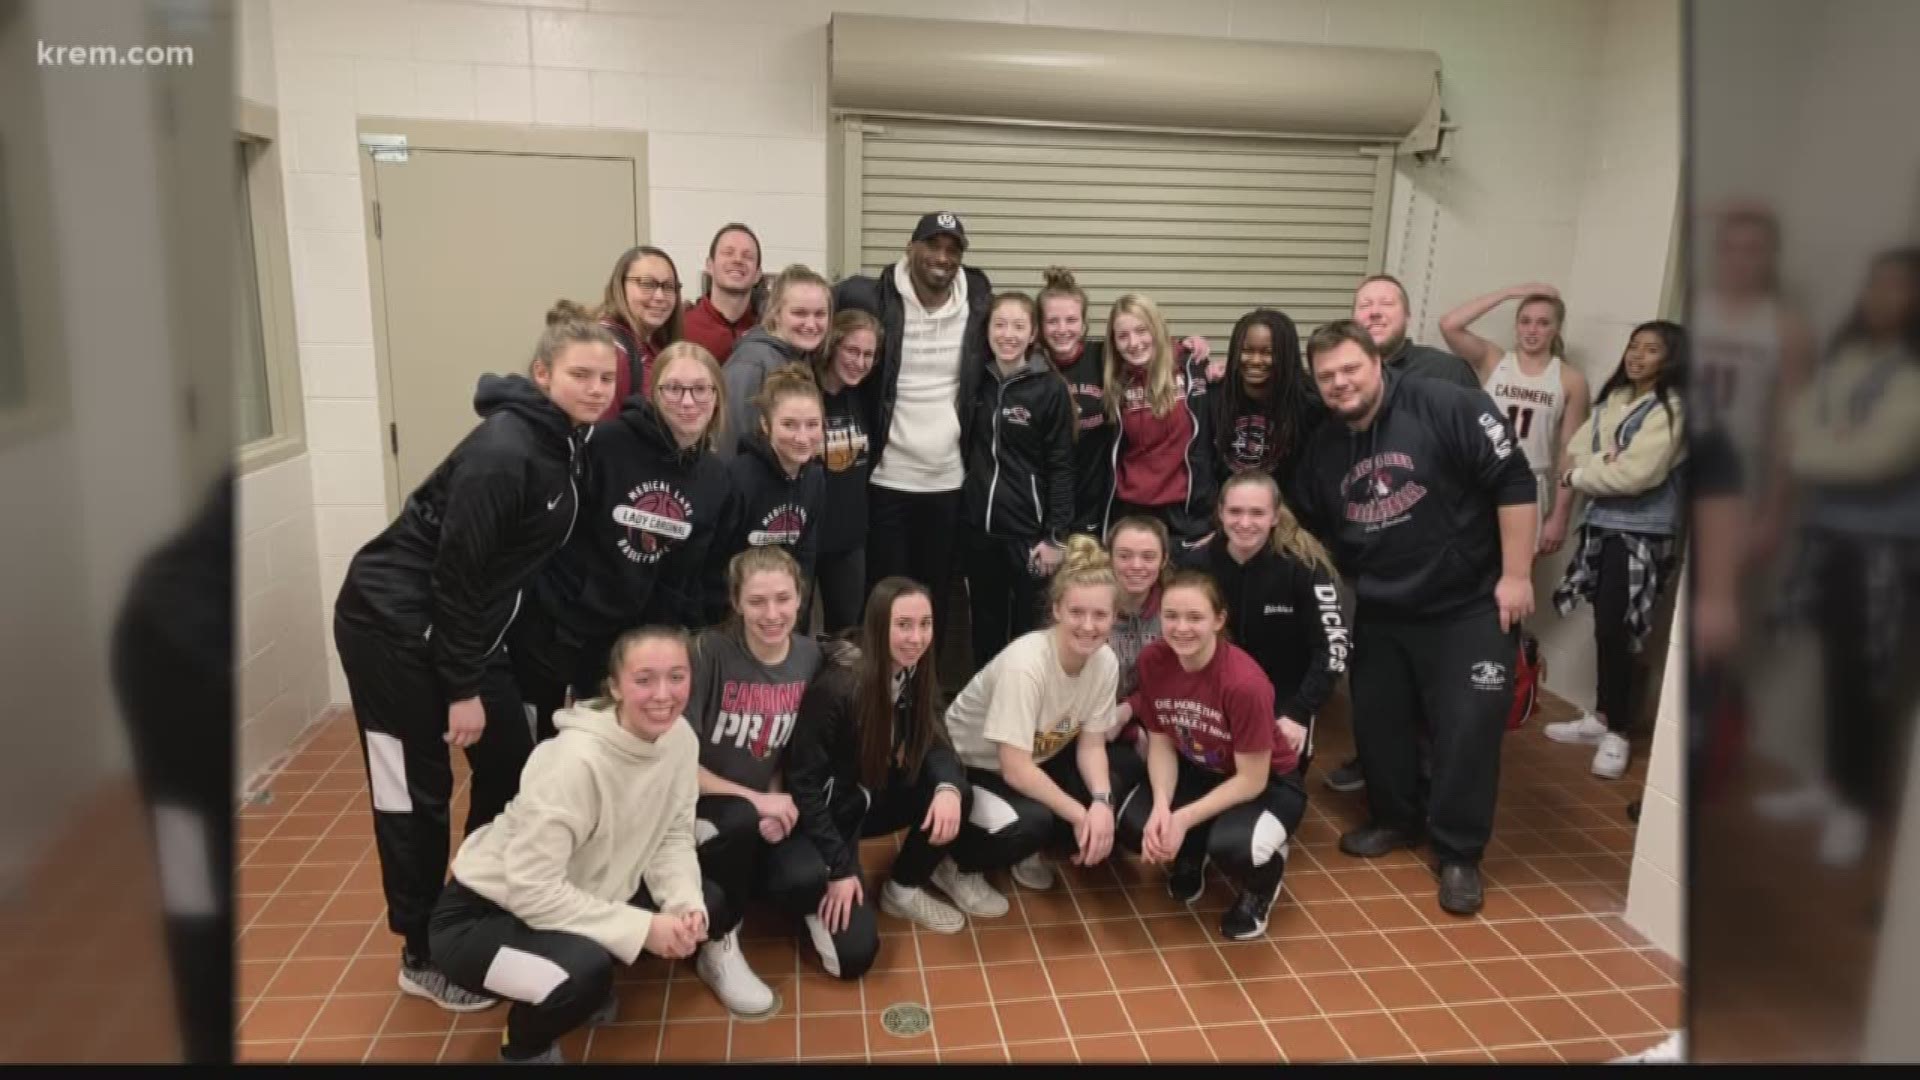 Kobe and his daughter Gianna attended a girls basketball game in Cashmere, Washington, earlier this month.